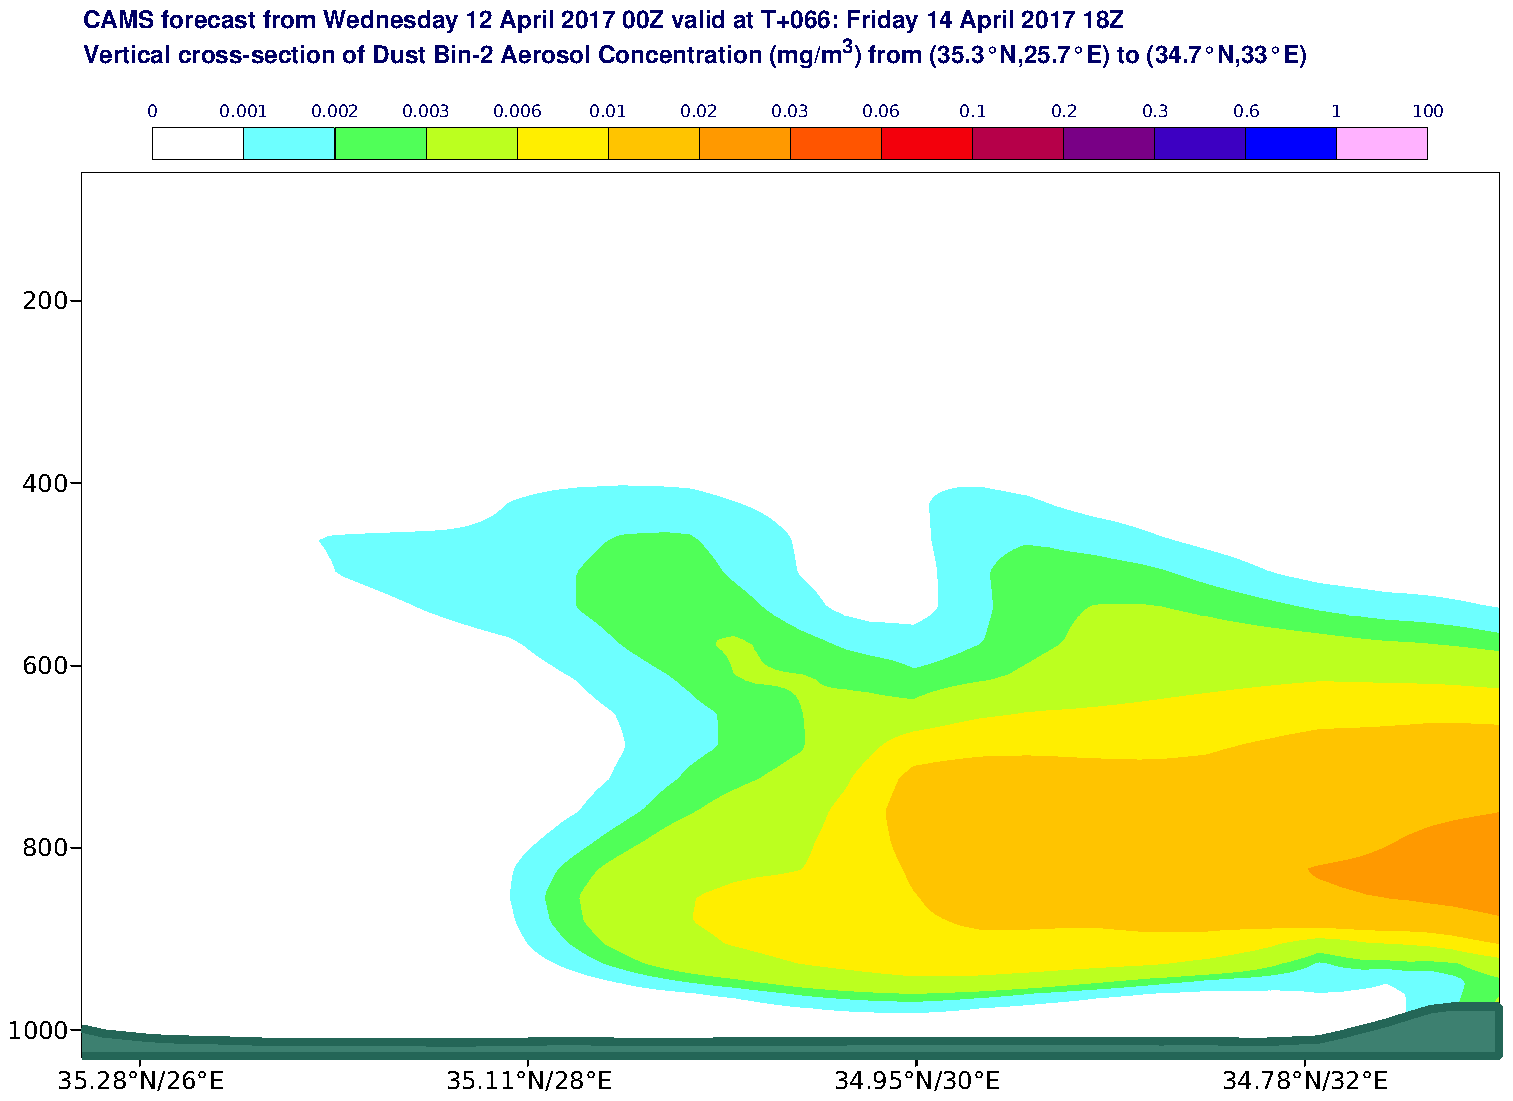 Vertical cross-section of Dust Bin-2 Aerosol Concentration (mg/m3) valid at T66 - 2017-04-14 18:00